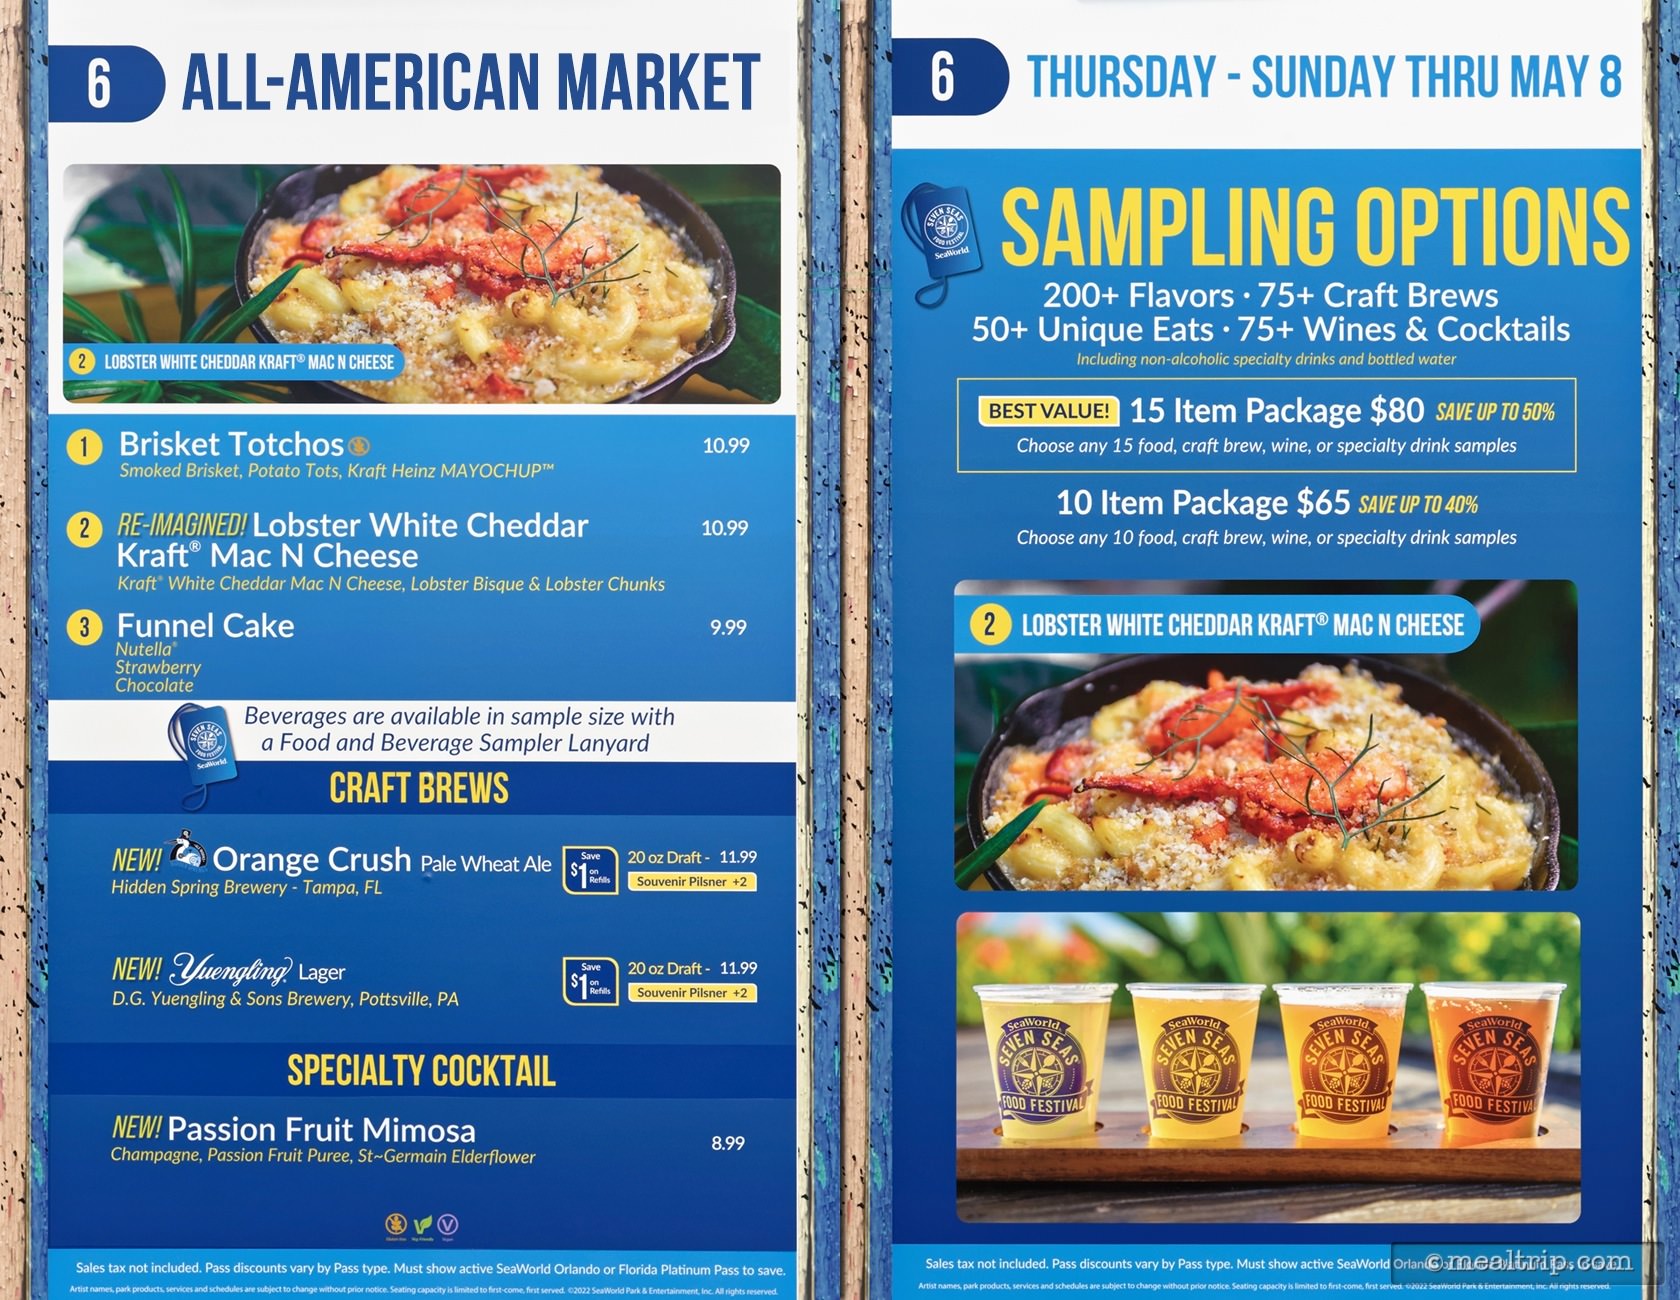 The All-American Market Menu Boards with Prices